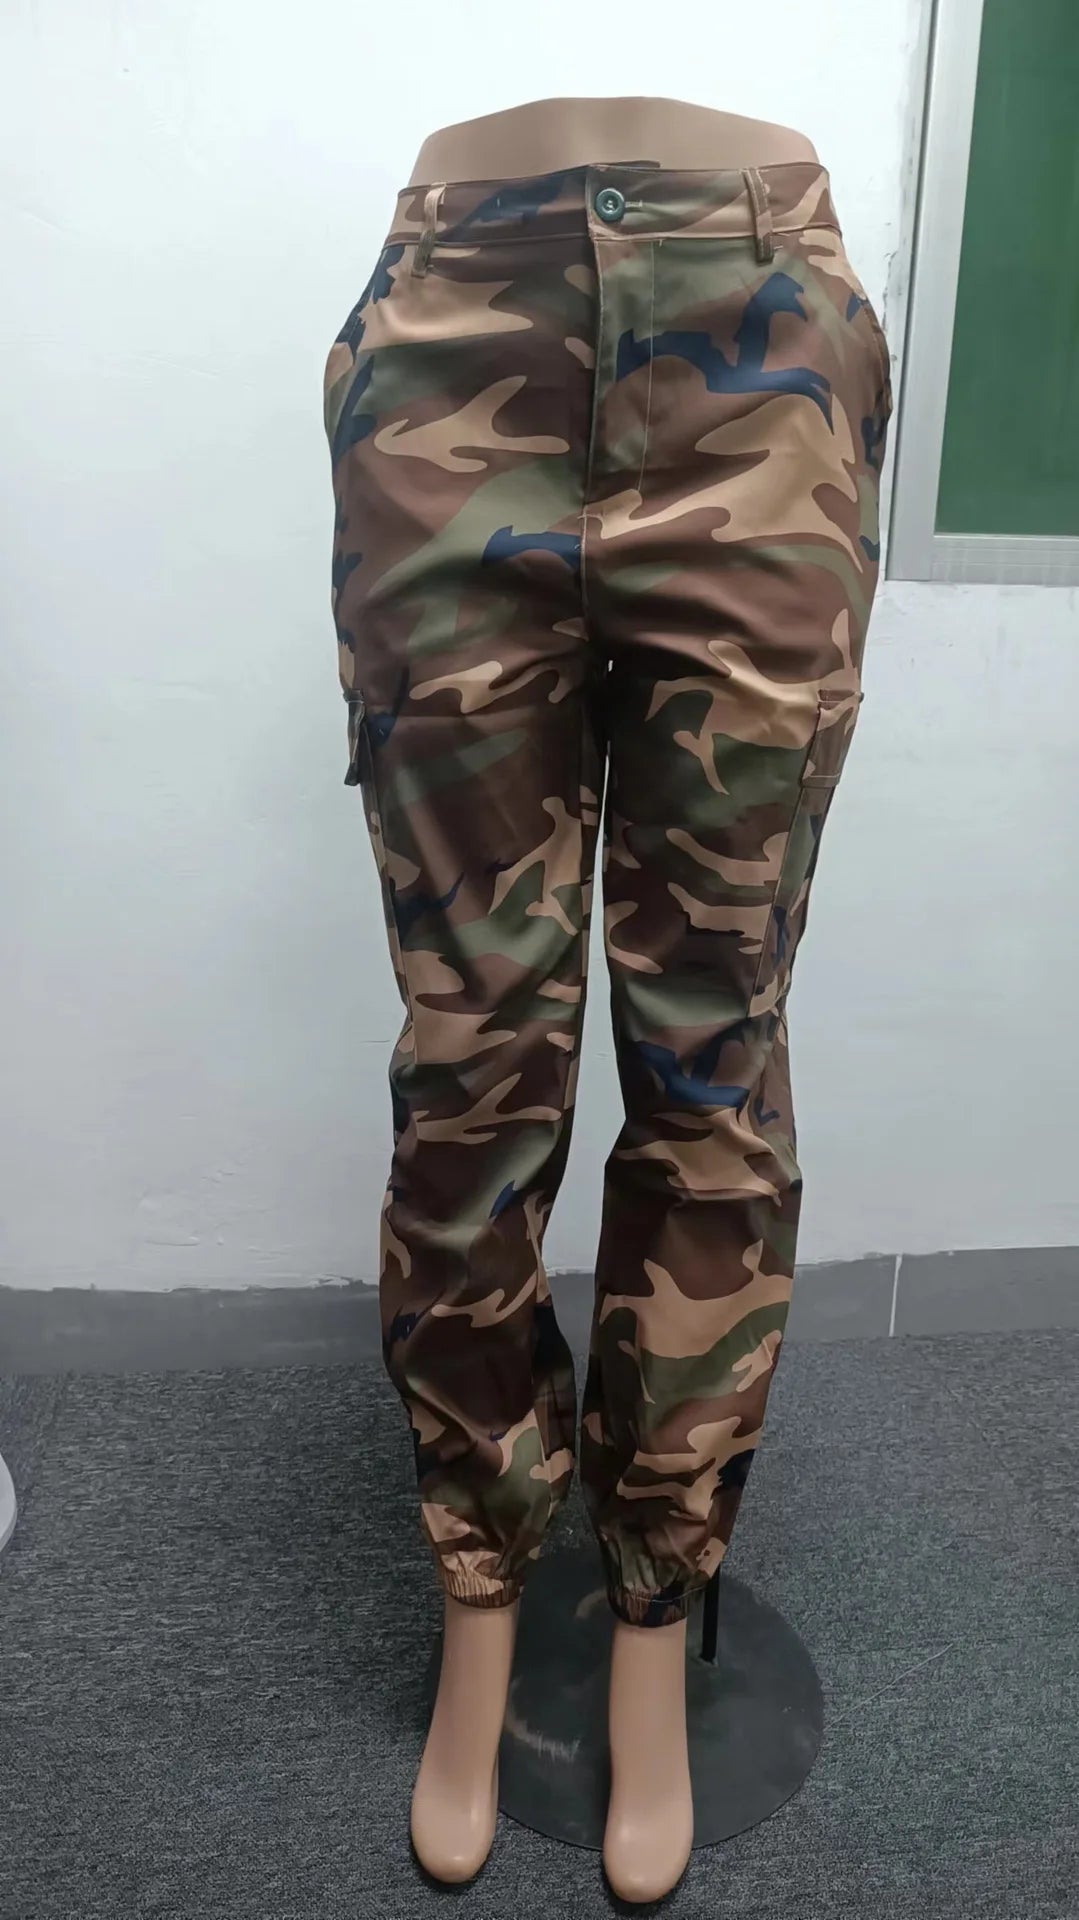 Buy Girls Camouflage Hip Hop Jogger Boys Cool Street Dance Pants Kids Camo  Cargo Trousers at Amazon.in